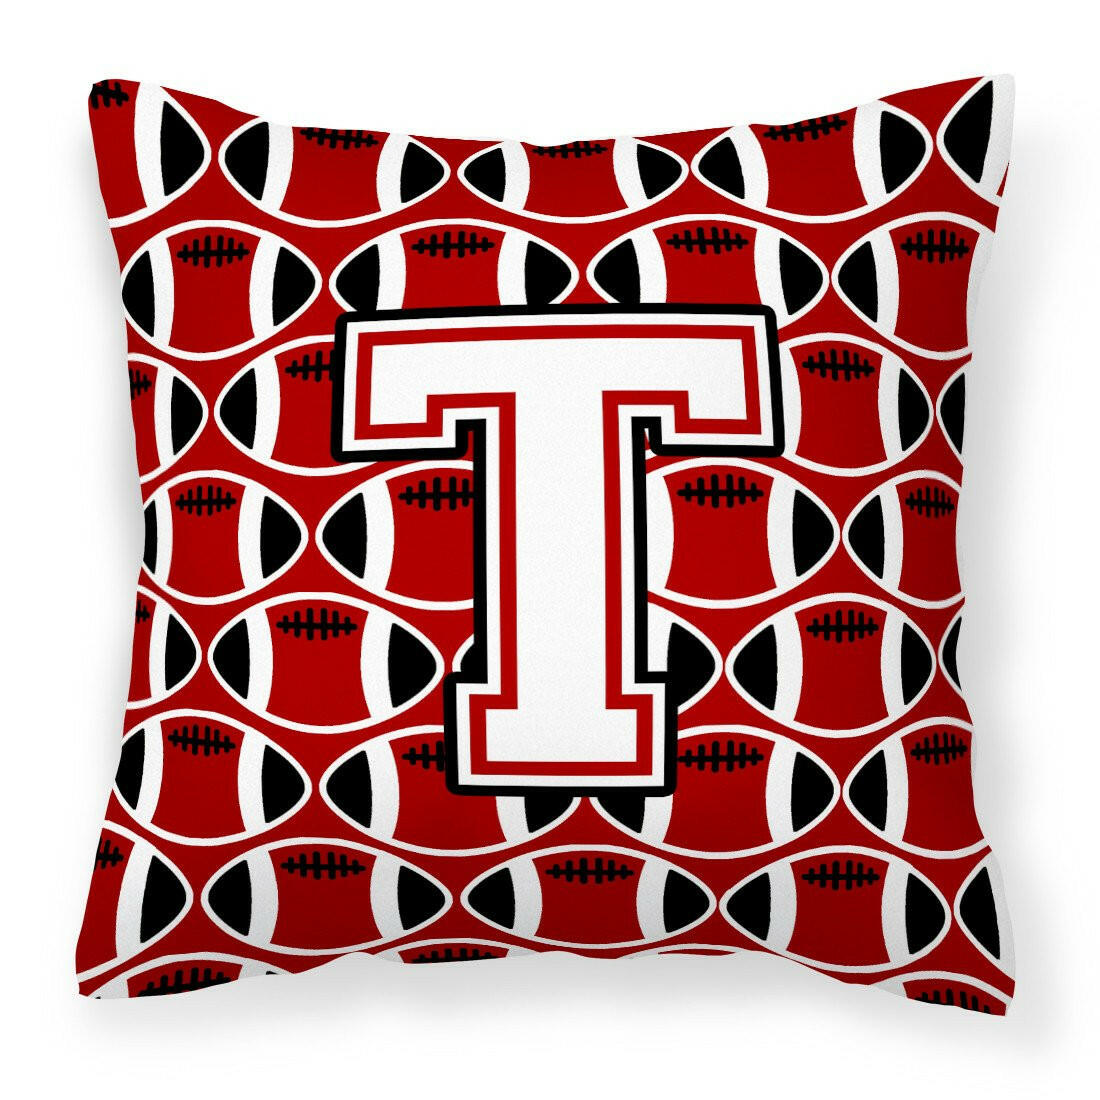 Letter T Football Cardinal and White Fabric Decorative Pillow CJ1082-TPW1414 by Caroline's Treasures